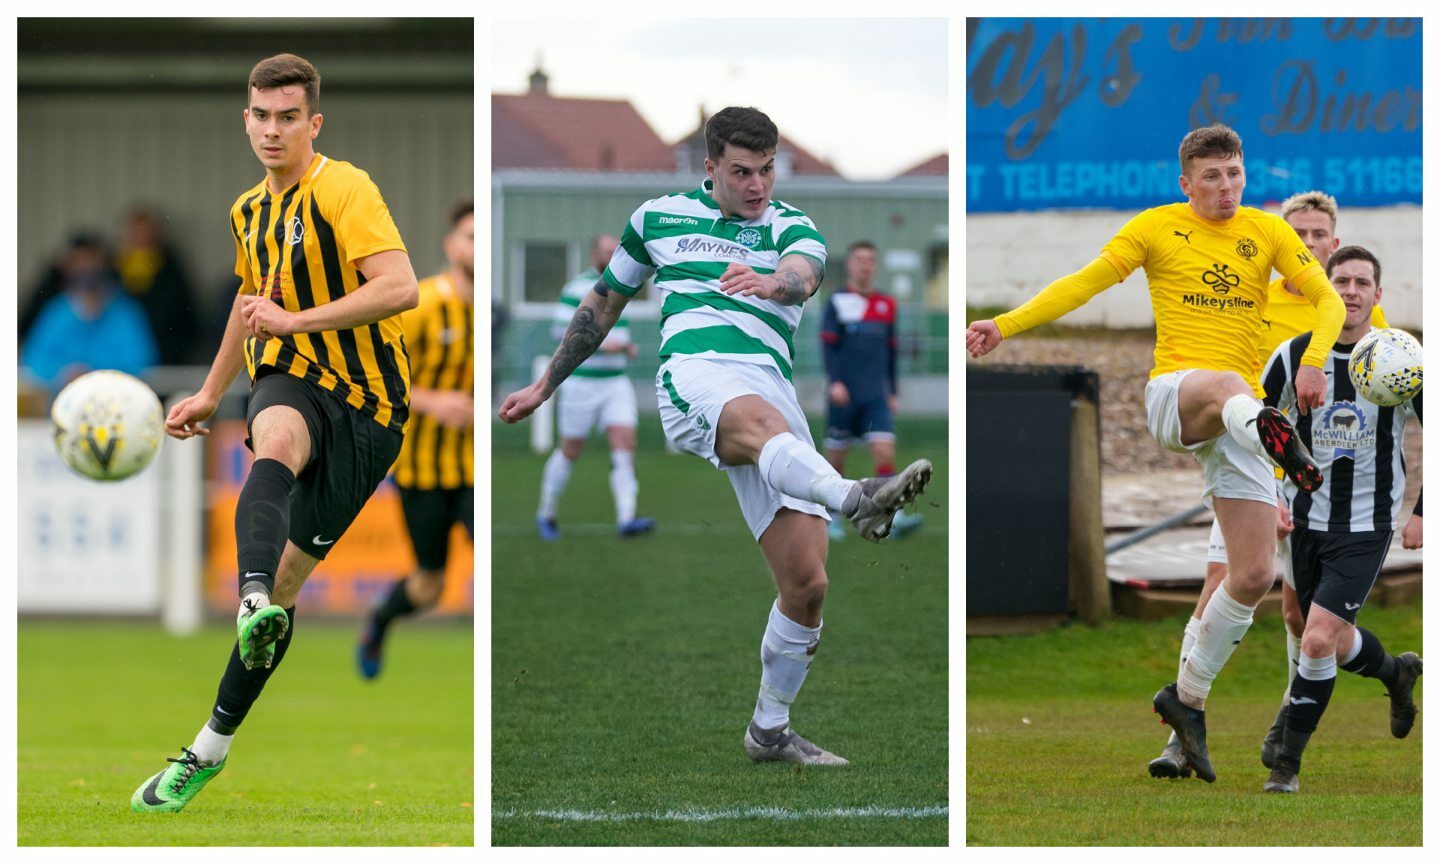 Buckie Thistle's three new signings (from left to right): Tom MacLennan, Joe McCabe and Cohen Ramsay.